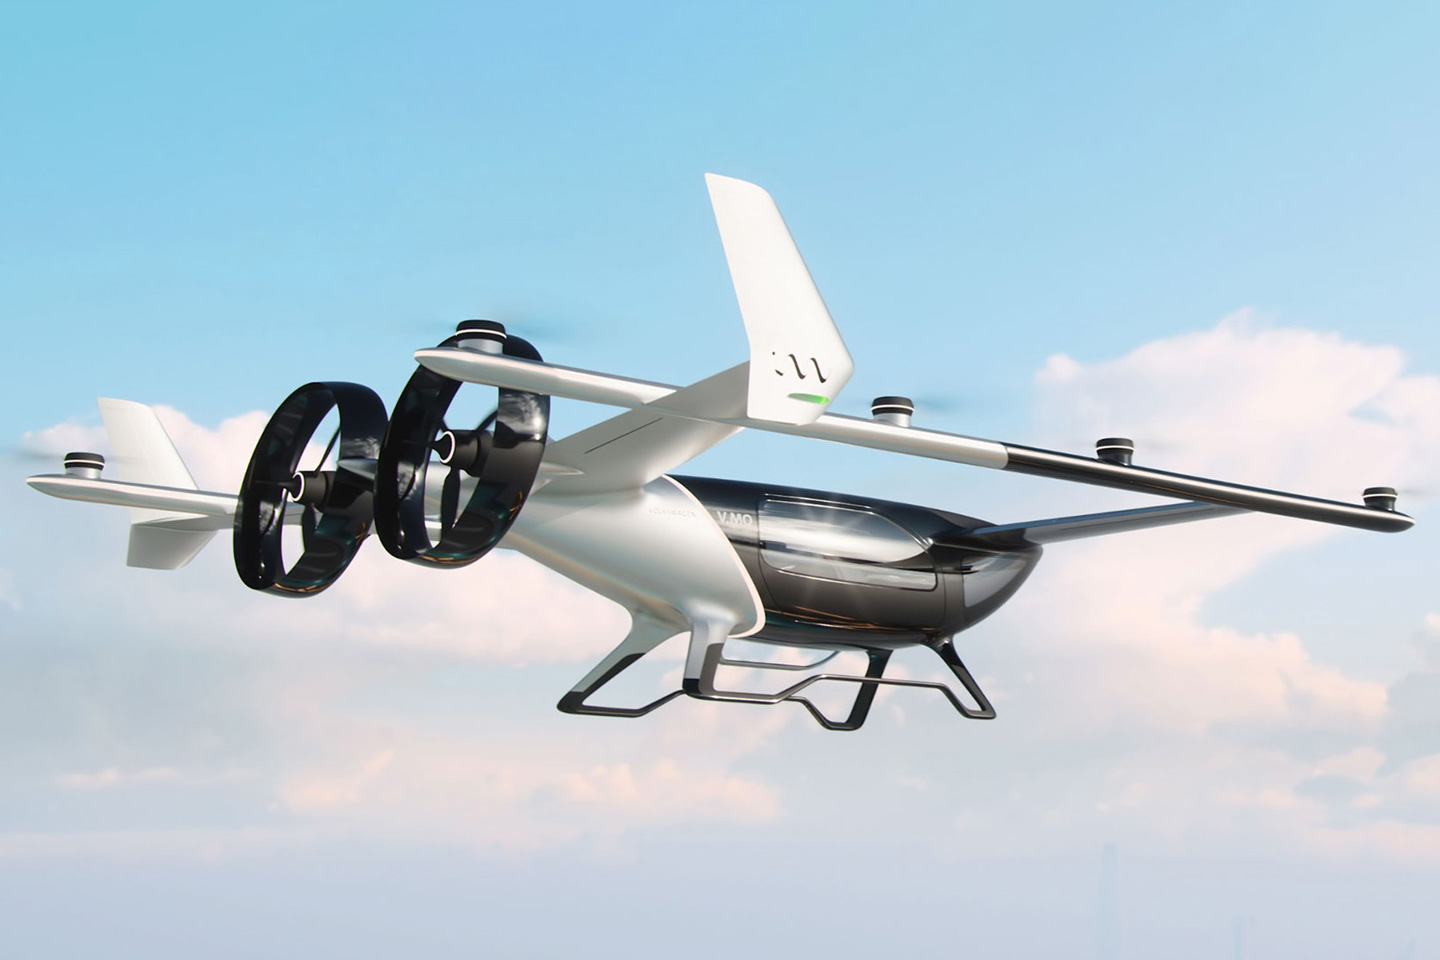 volkswagen-just-announced-that-they-ve-been-working-on-their-first-evtol-flying-car-yanko-design